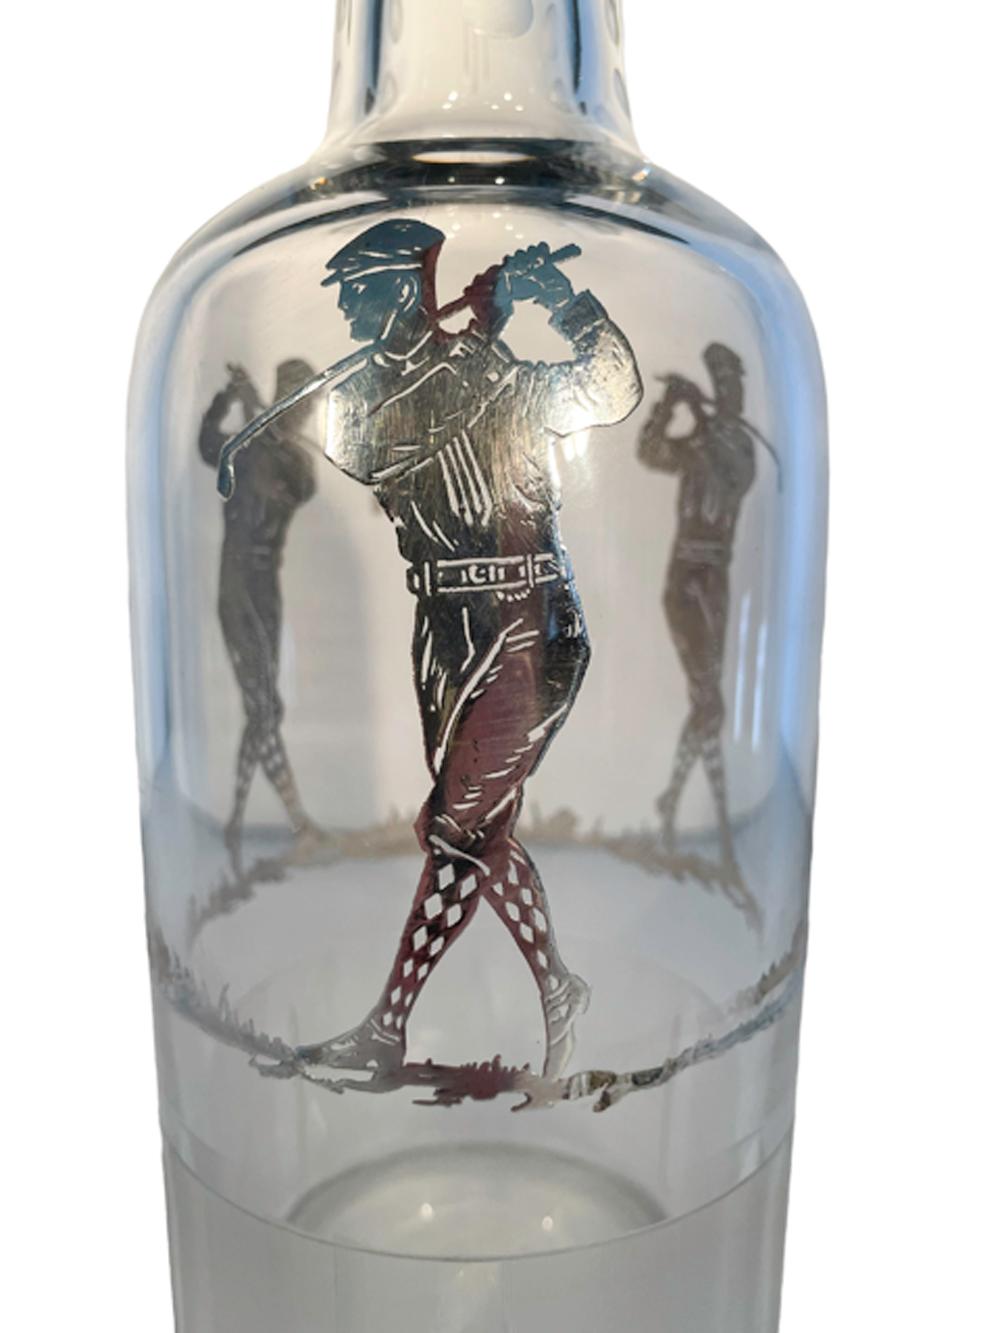 Art Deco silver overlay, cut glass back bar bottle or decanter having a silver overlay collar and three golfers repeated around the body. The neck of the bottle cut with dots between the collar and shoulder with three vertical lines between each